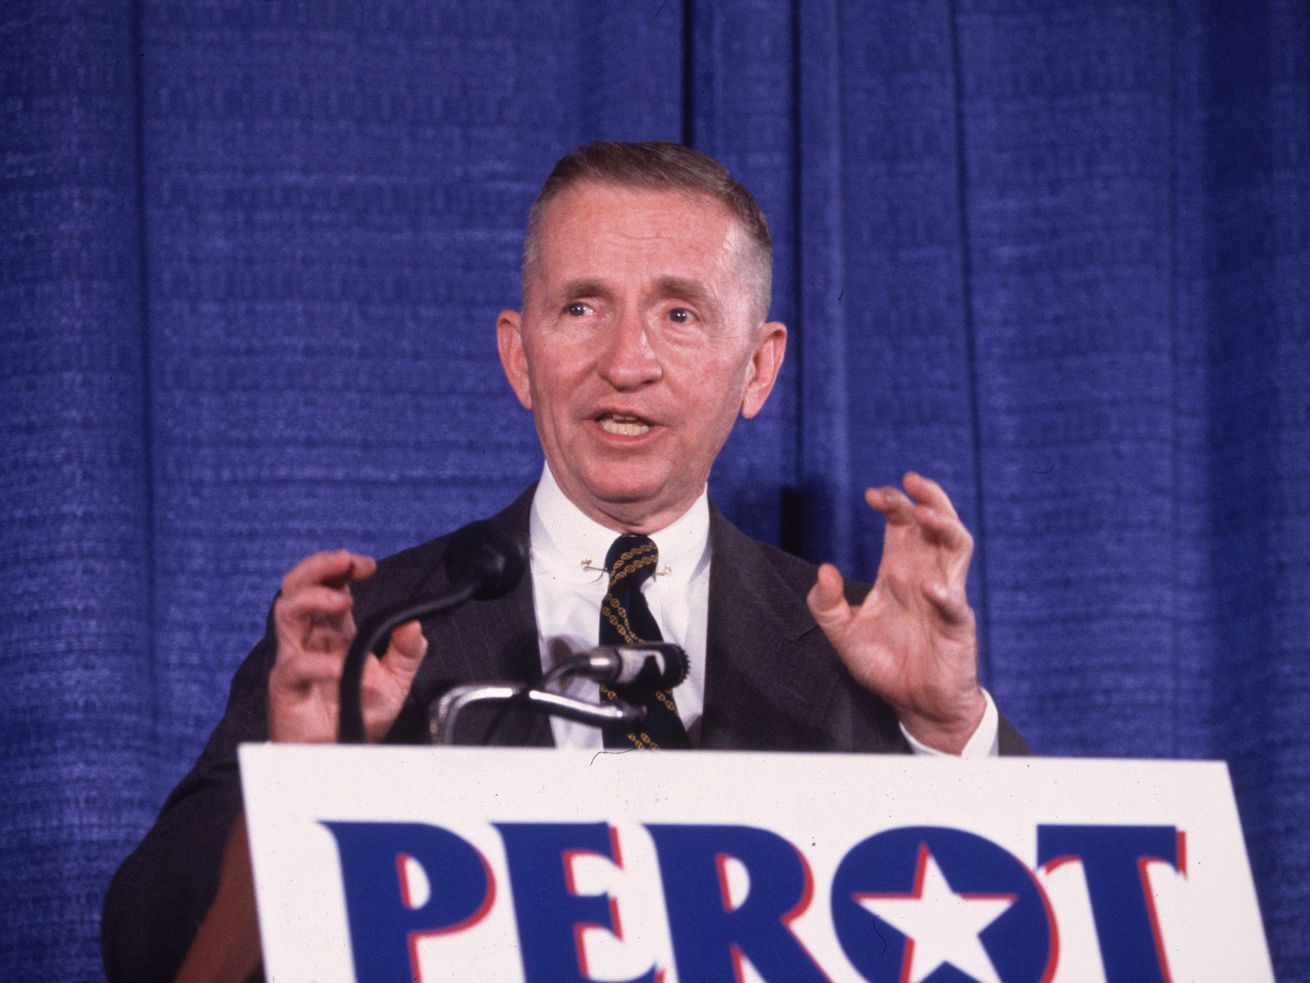 American businessman and politician Ross Perot, undeclared candidate for president, speaking and gesticulating at a podium during a press conference, Annapolis, Maryland.